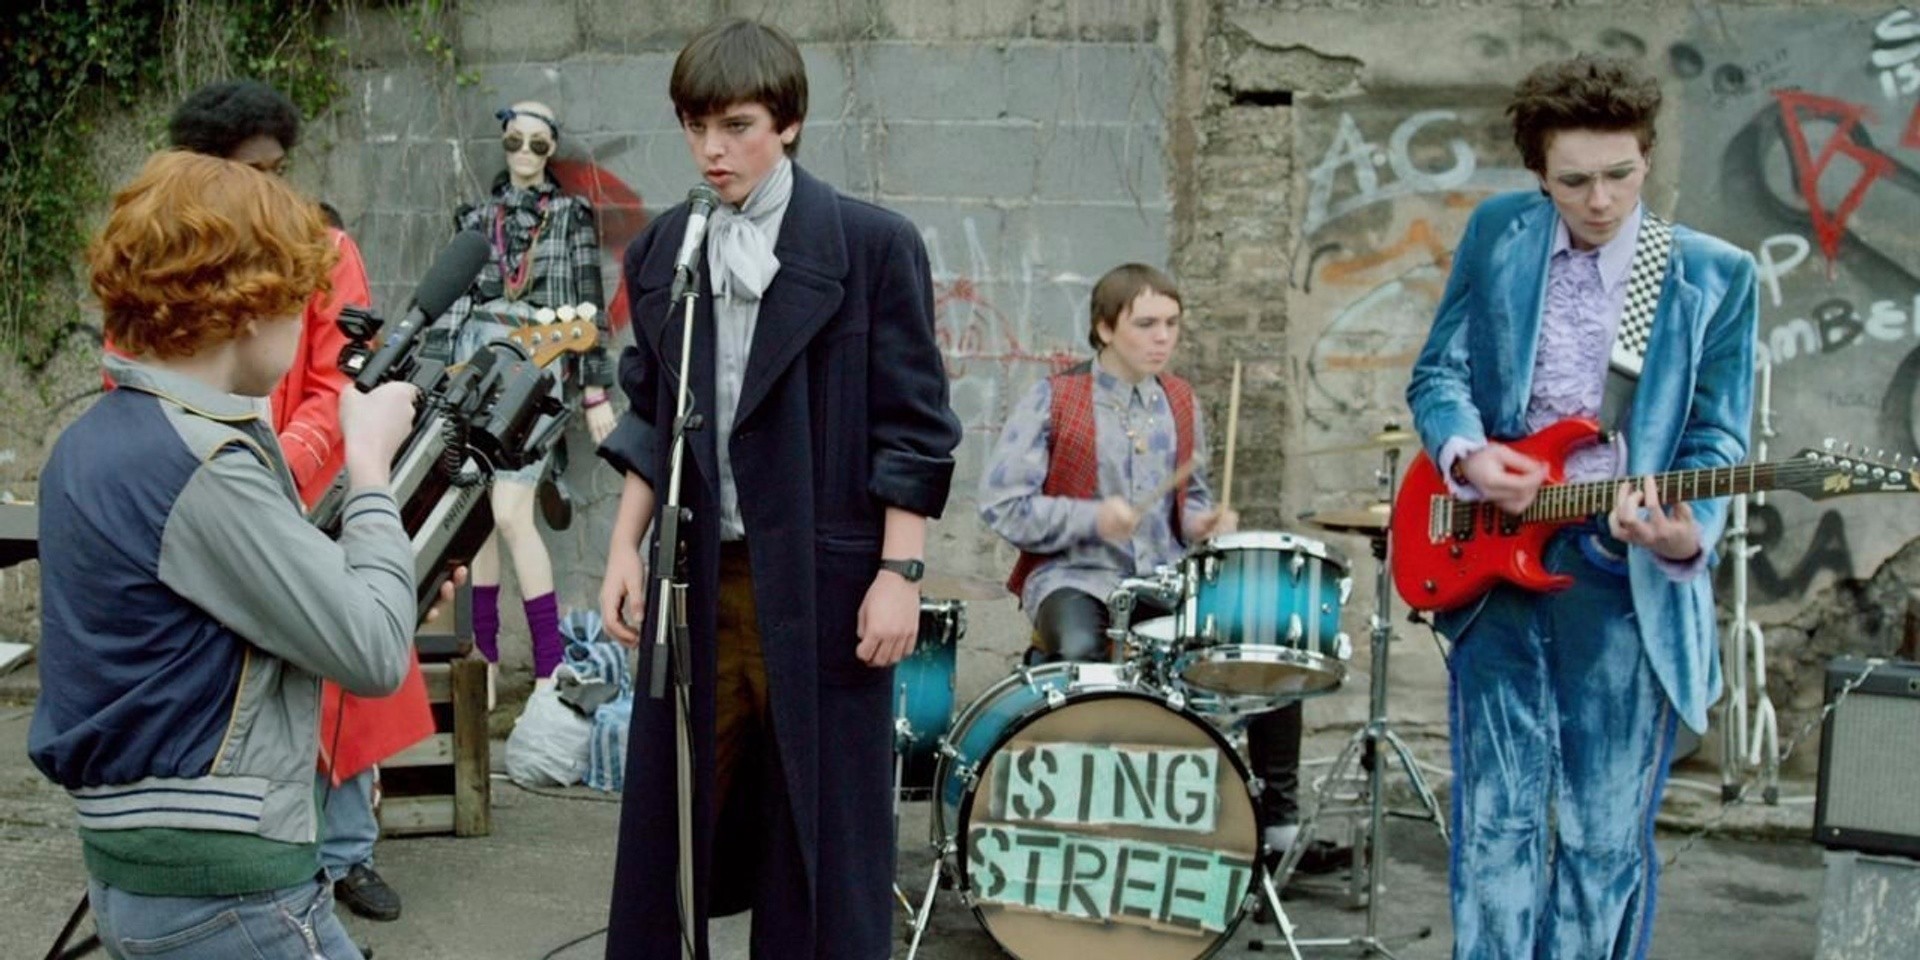 Crowd pleasing and endlessly charming, 'Sing Street' is a great 80s pop song wrapped in film